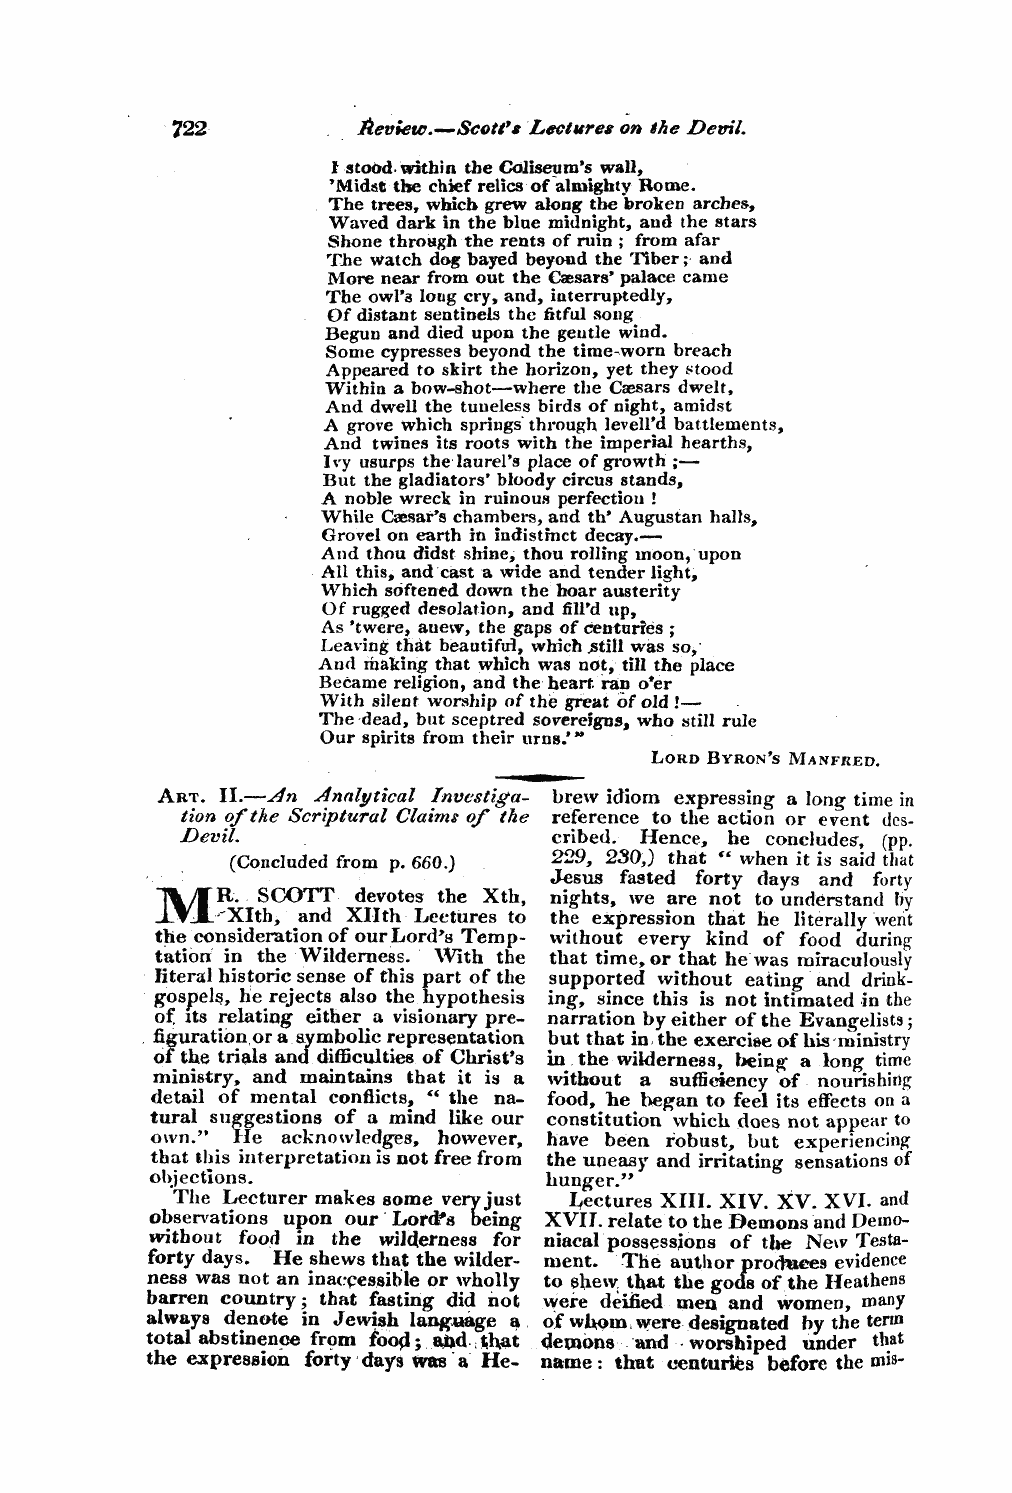 Monthly Repository (1806-1838) and Unitarian Chronicle (1832-1833): F Y, 1st edition: 42